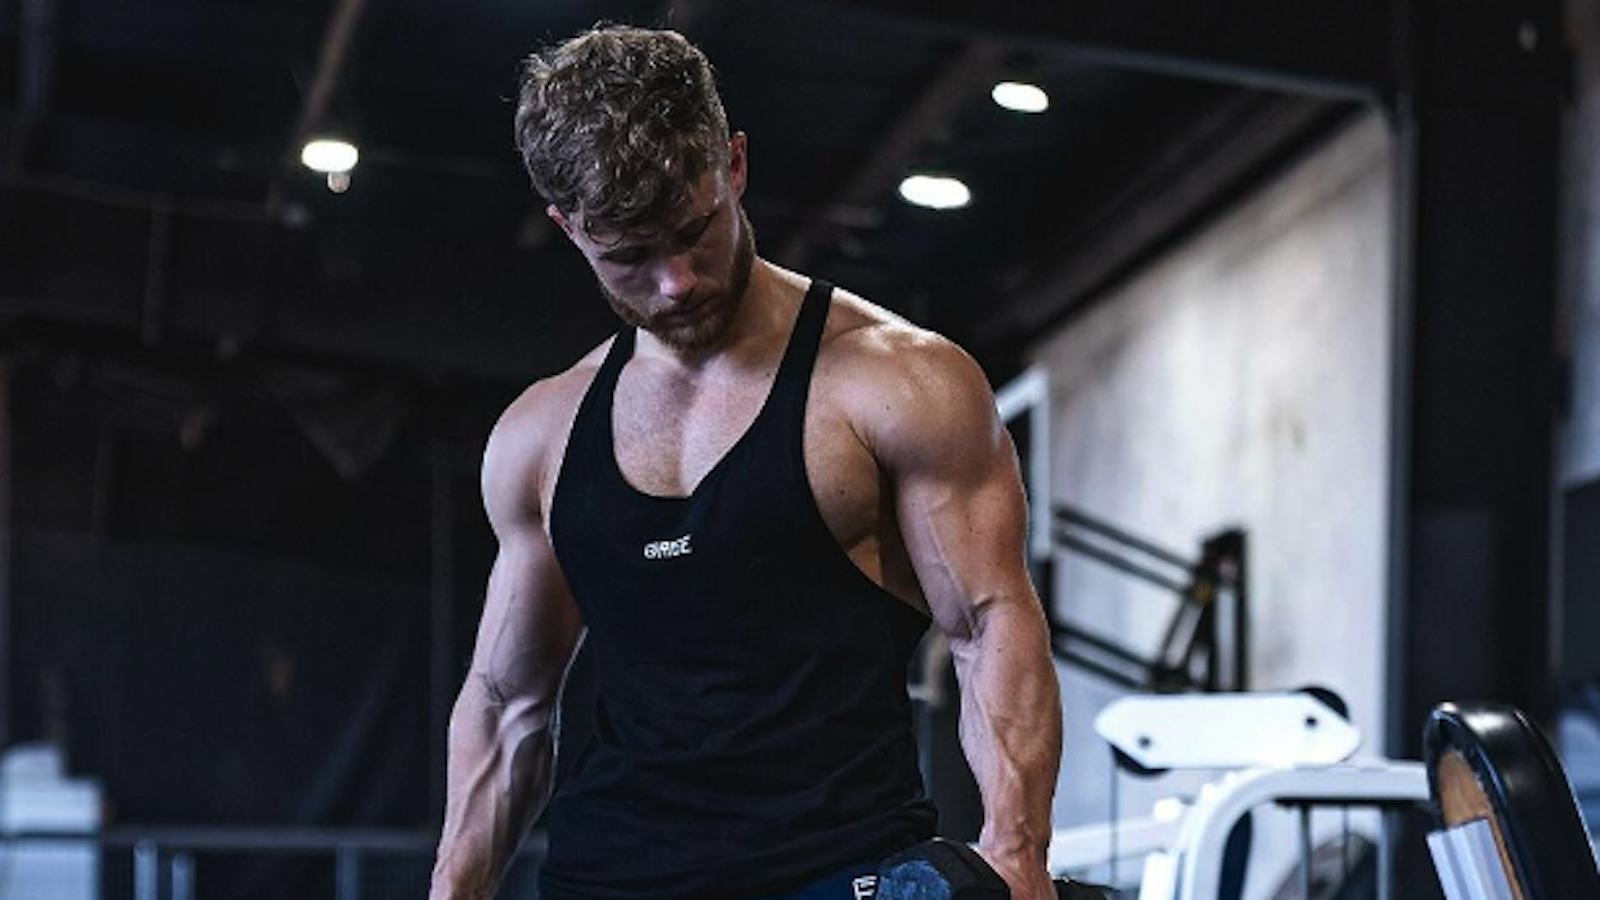 Jay Cutler Demonstrates the Lying French Press for Greater Triceps Gains